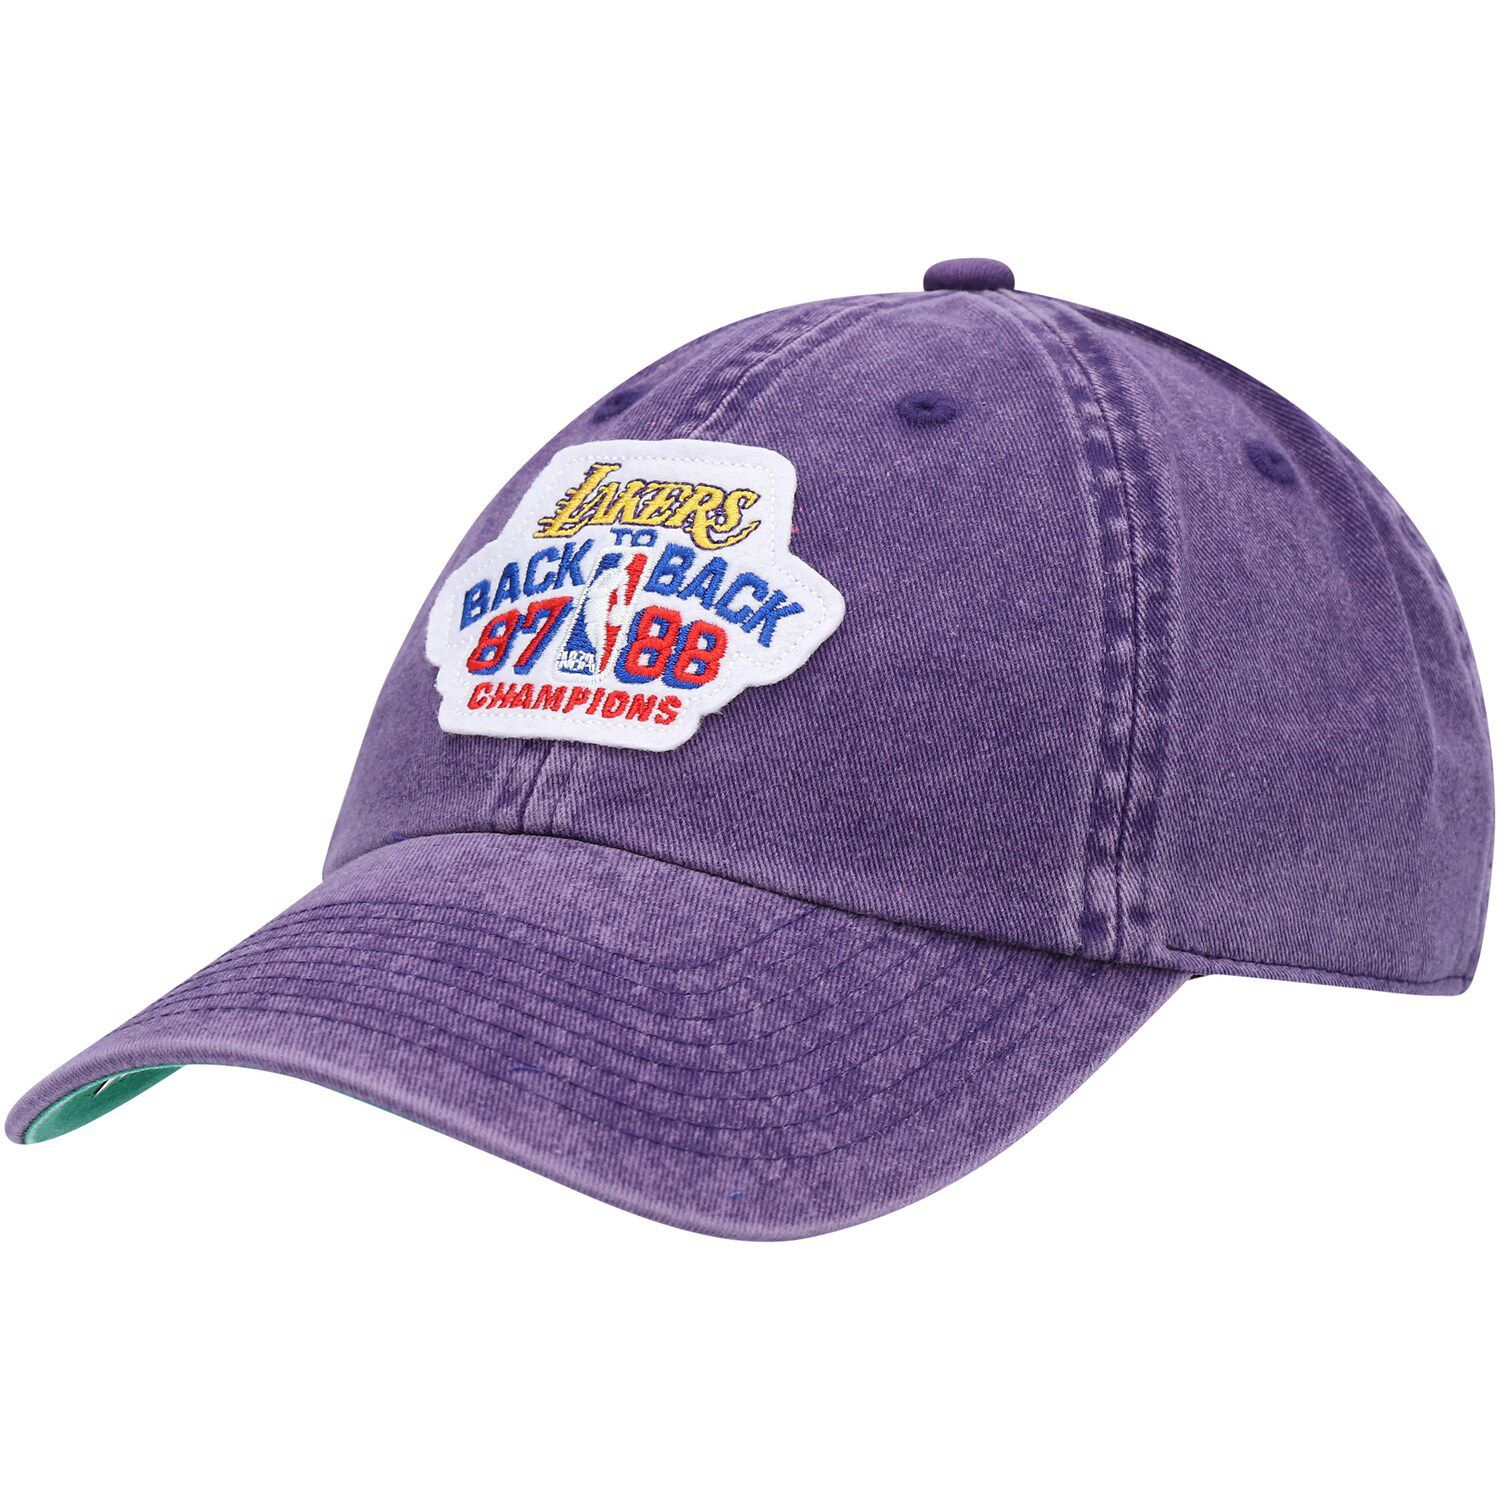 Image for Unbranded Men's Mitchell & Ness Purple Los Angeles Lakers Hardwood Classics Back to Back '87-'88 Champions Adjustable Dad Hat at Kohl's.